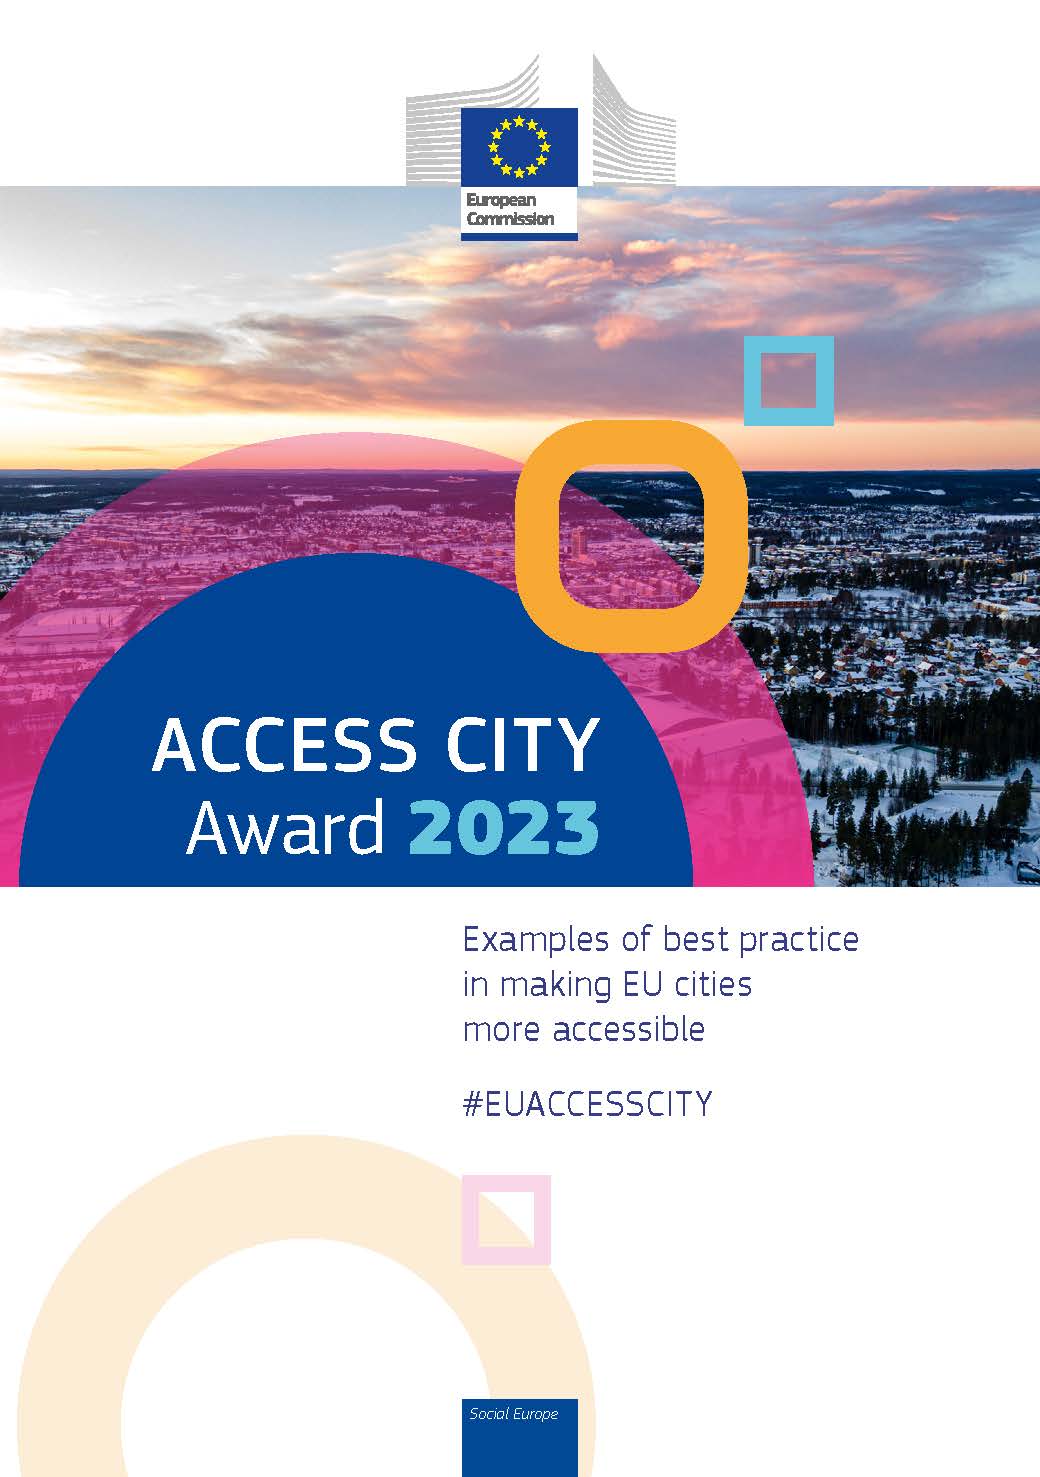 Access City Award 2023: Examples of best practice in making EU cities more accessible